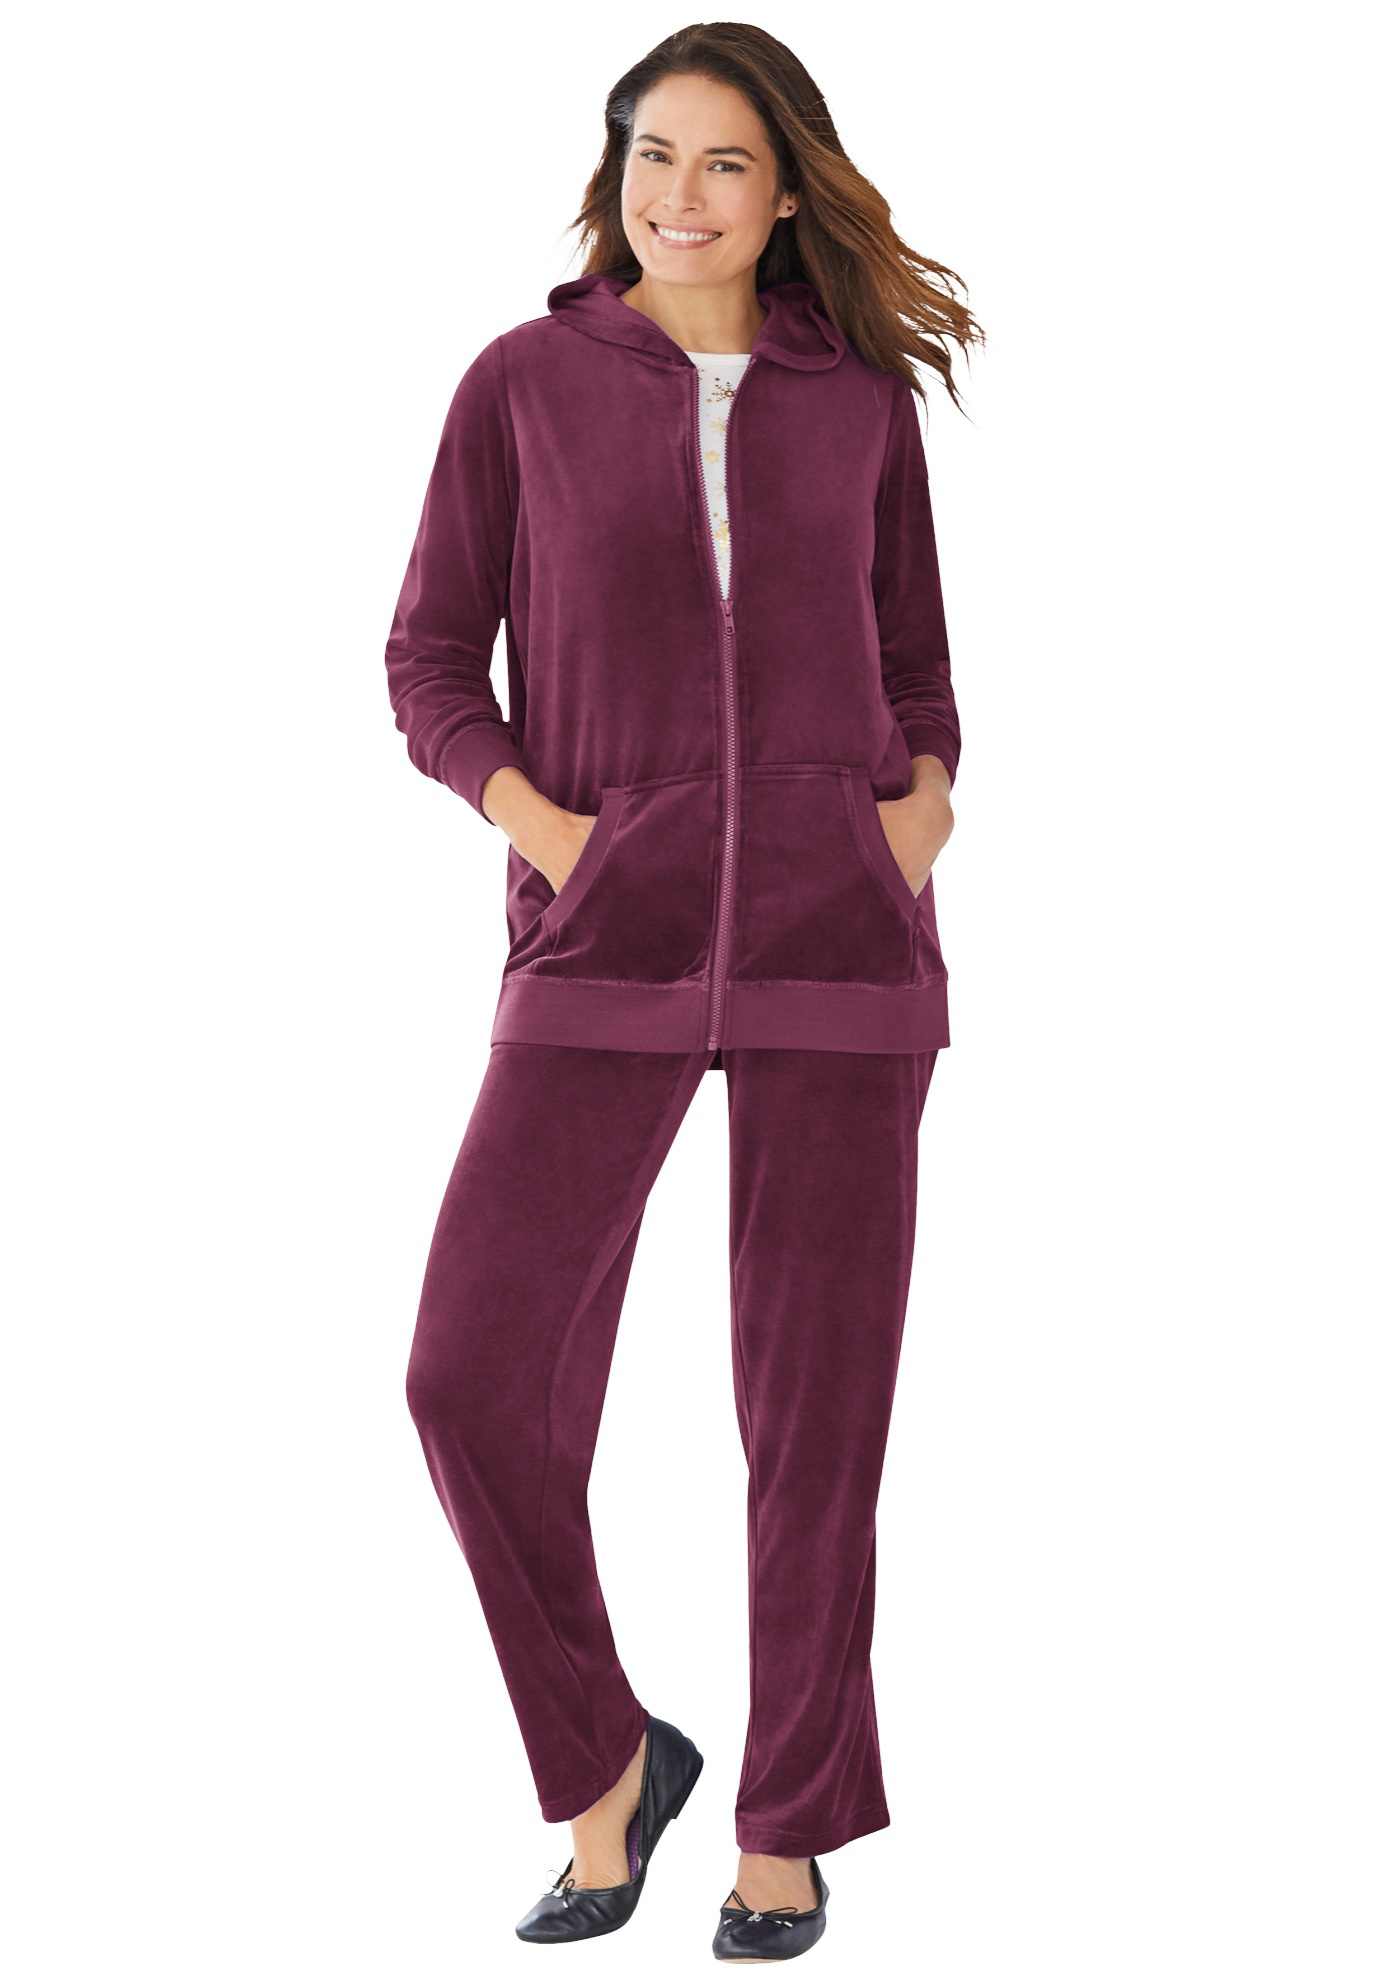 Woman Within Women's Plus Size 2-Piece Velour Hoodie Set Sweatsuit - image 1 of 5